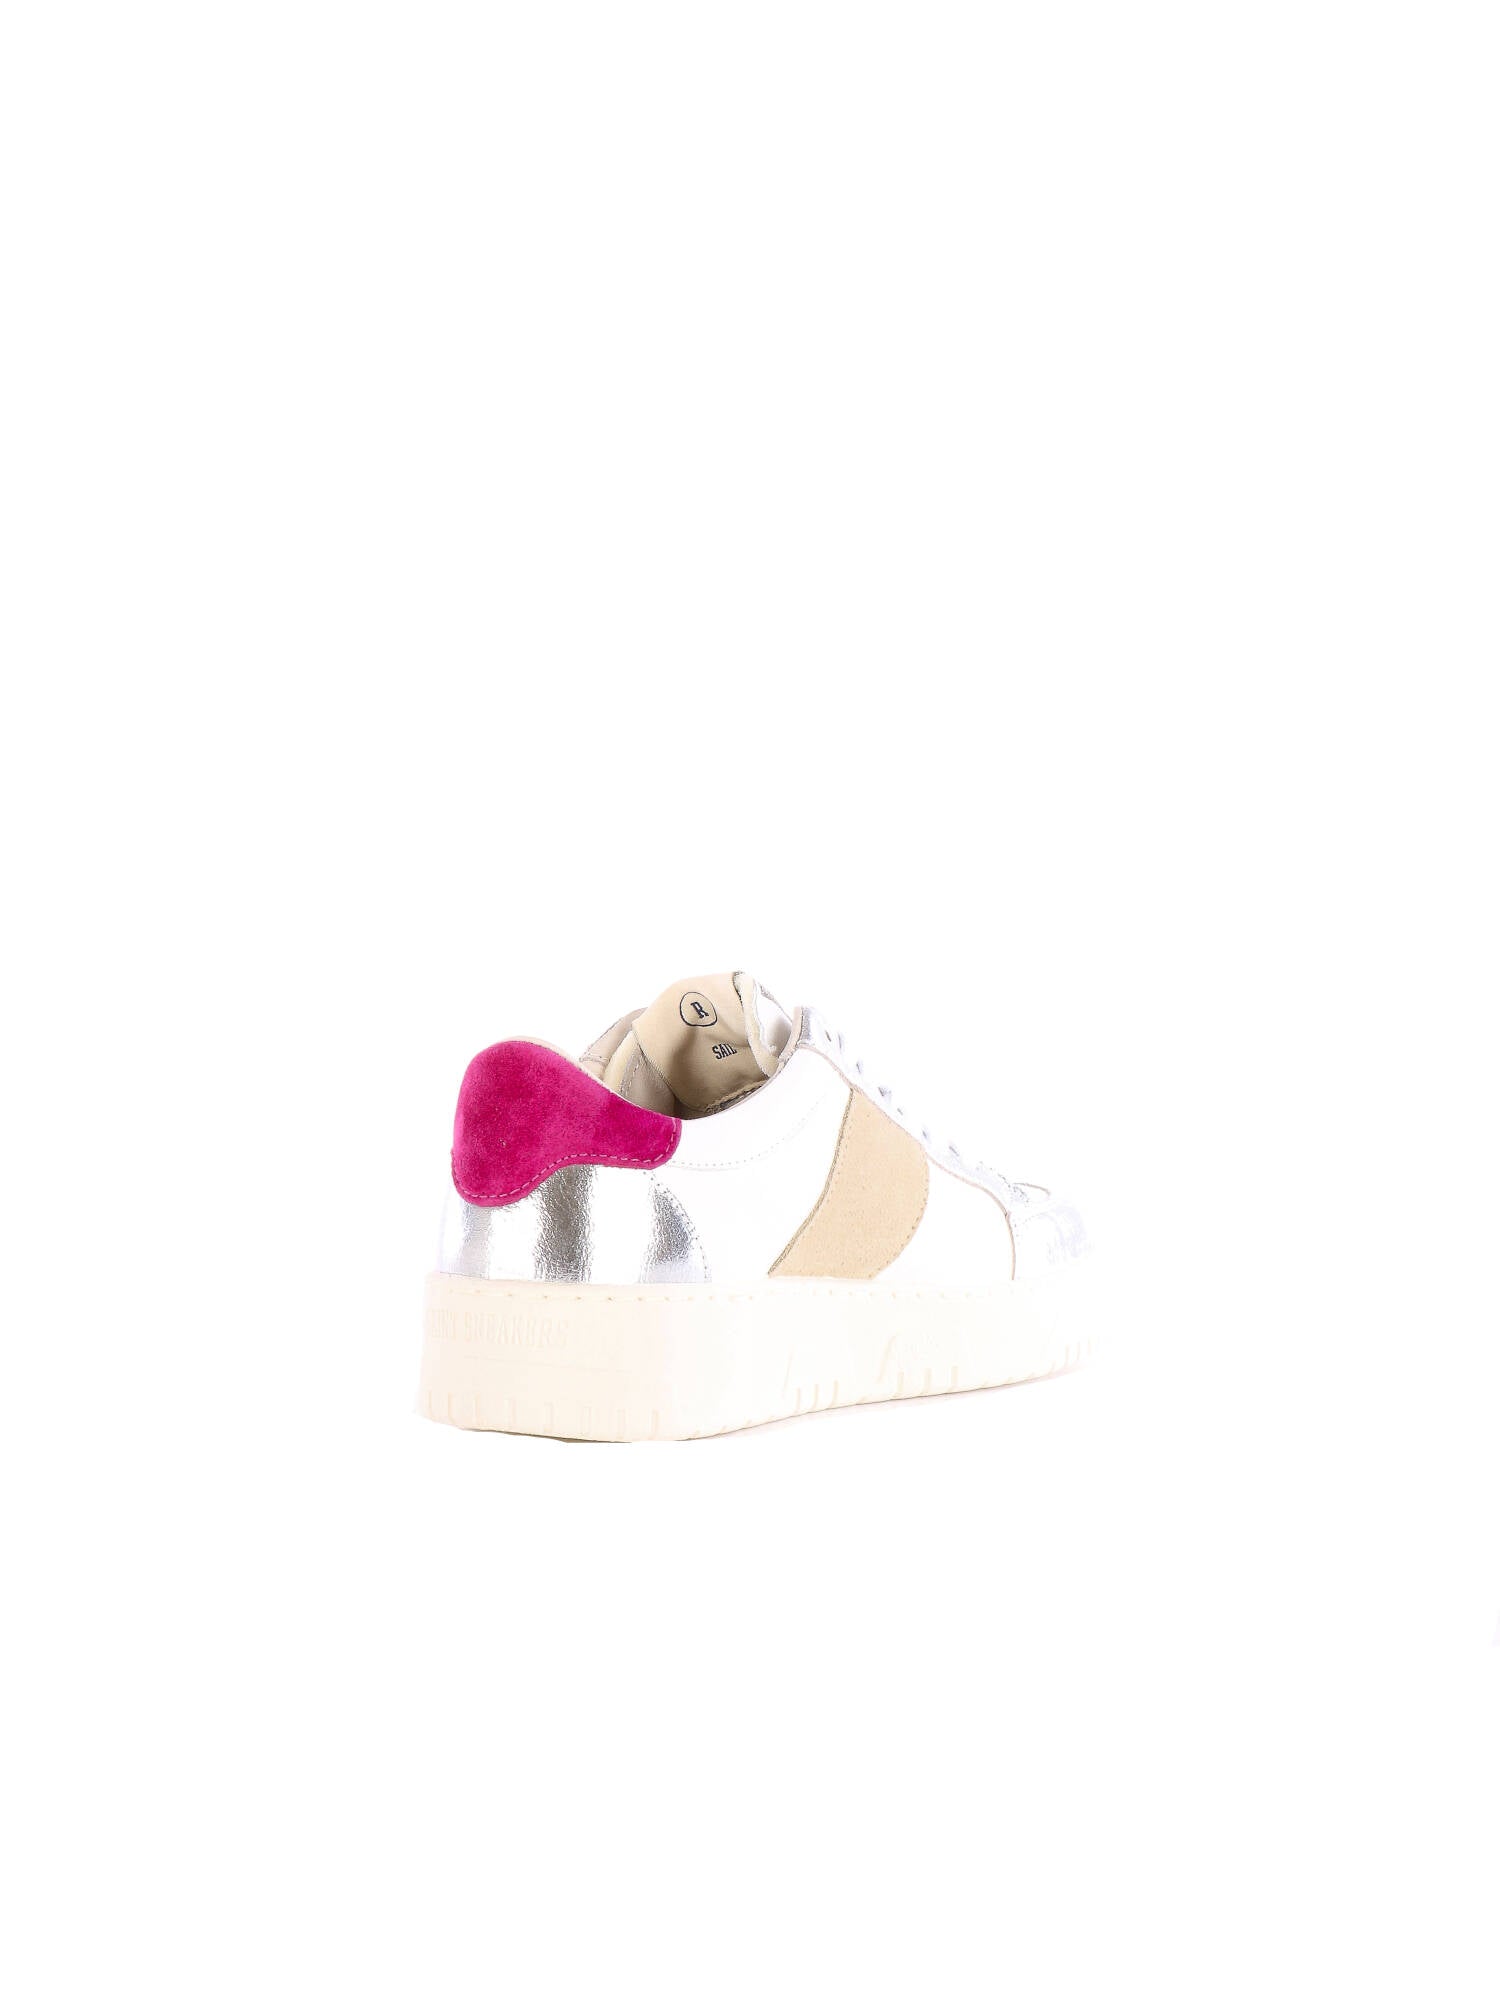 Saint Sneakers donna sneakers bianco/argento/fuxia